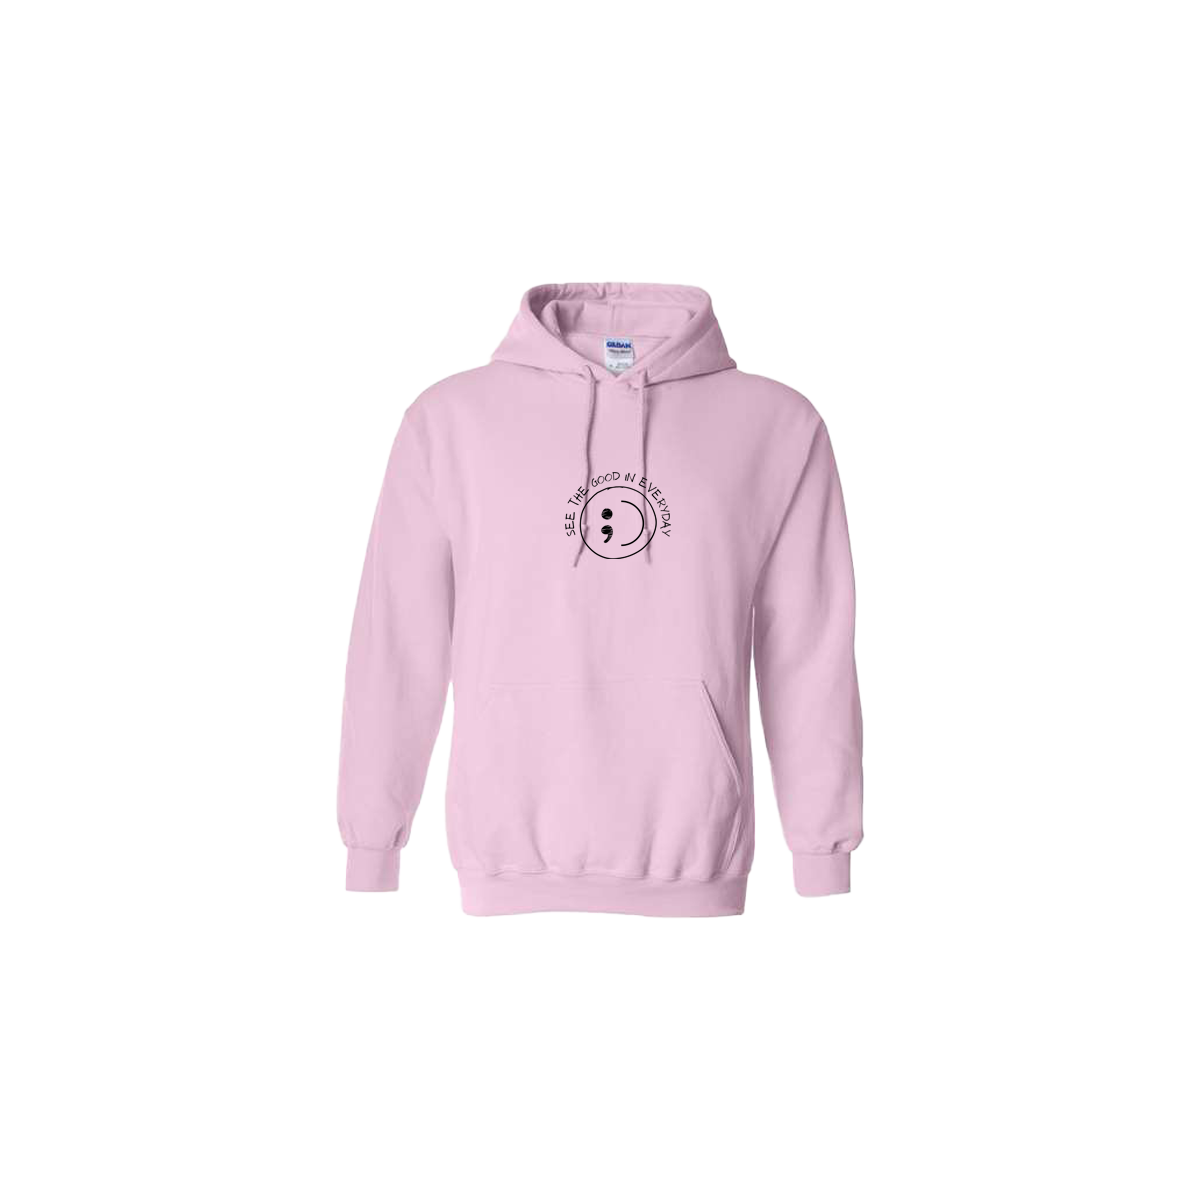 See the Good in Everyday Smiley Embroidered Light Pink Hoodie - Mental Health Awareness Clothing